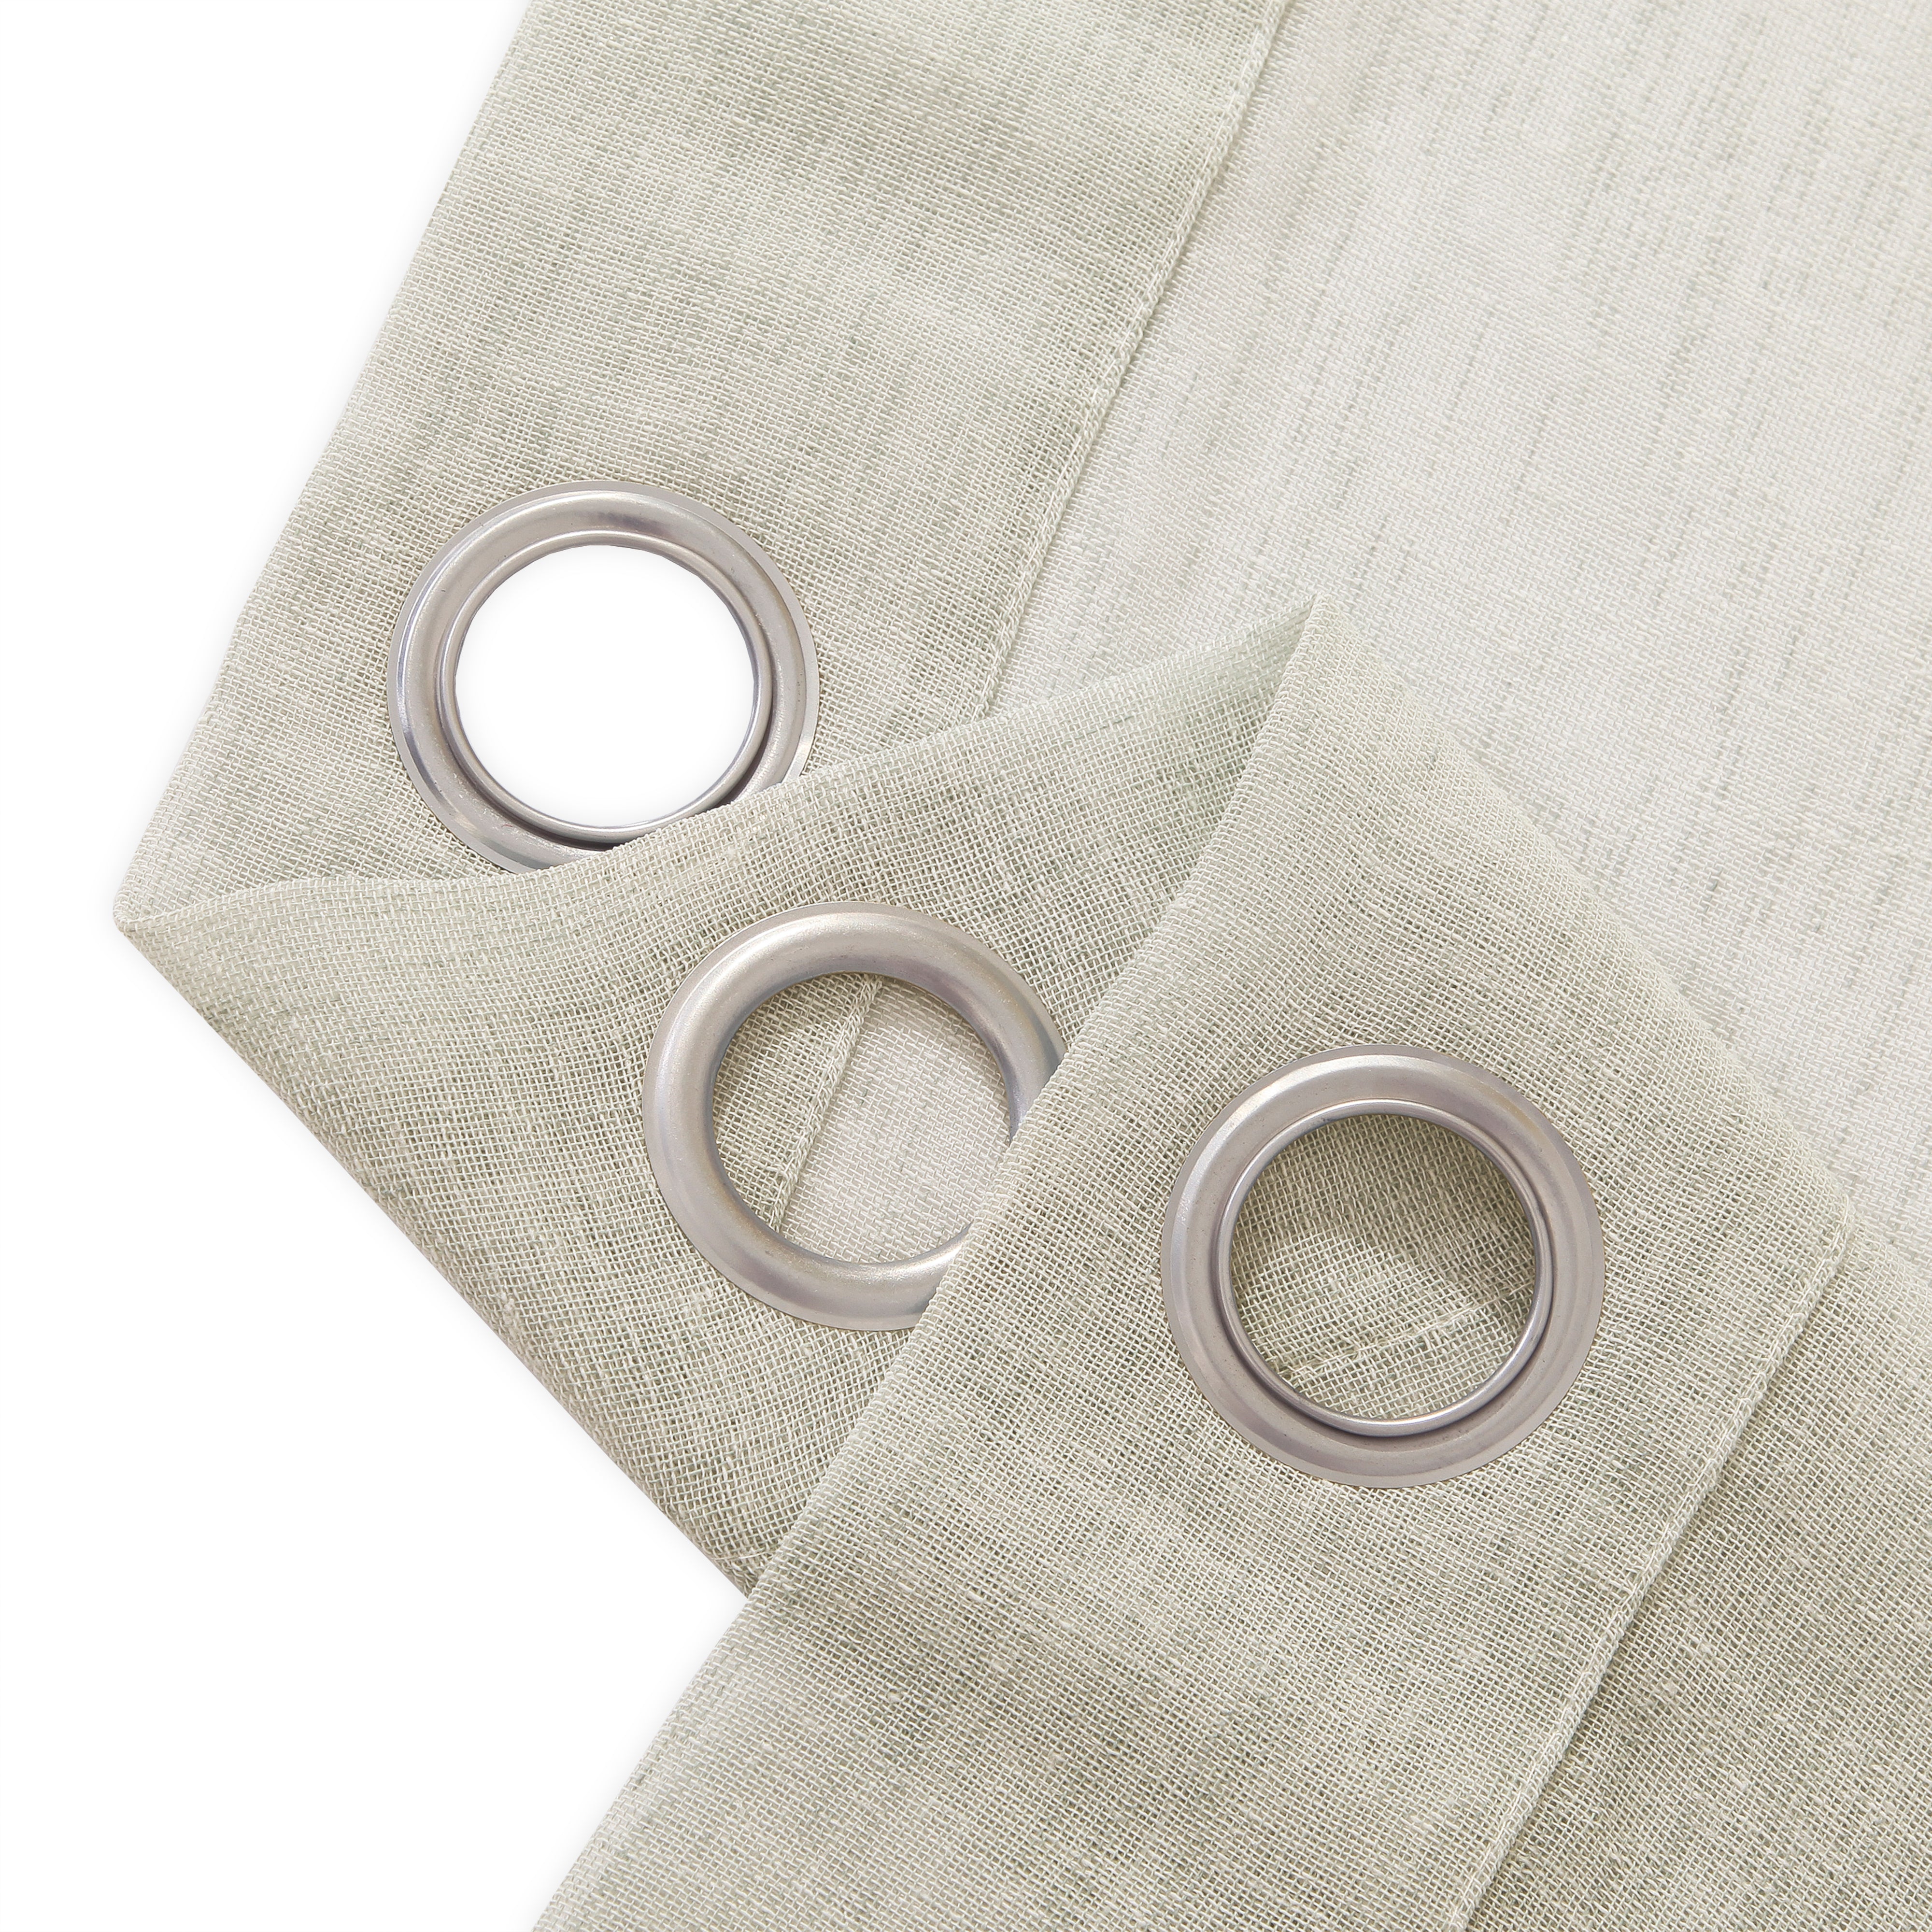 Dainty Home Au Natural Airy & Breathable Light Filtering Grommet Window Curtains Set Of 4